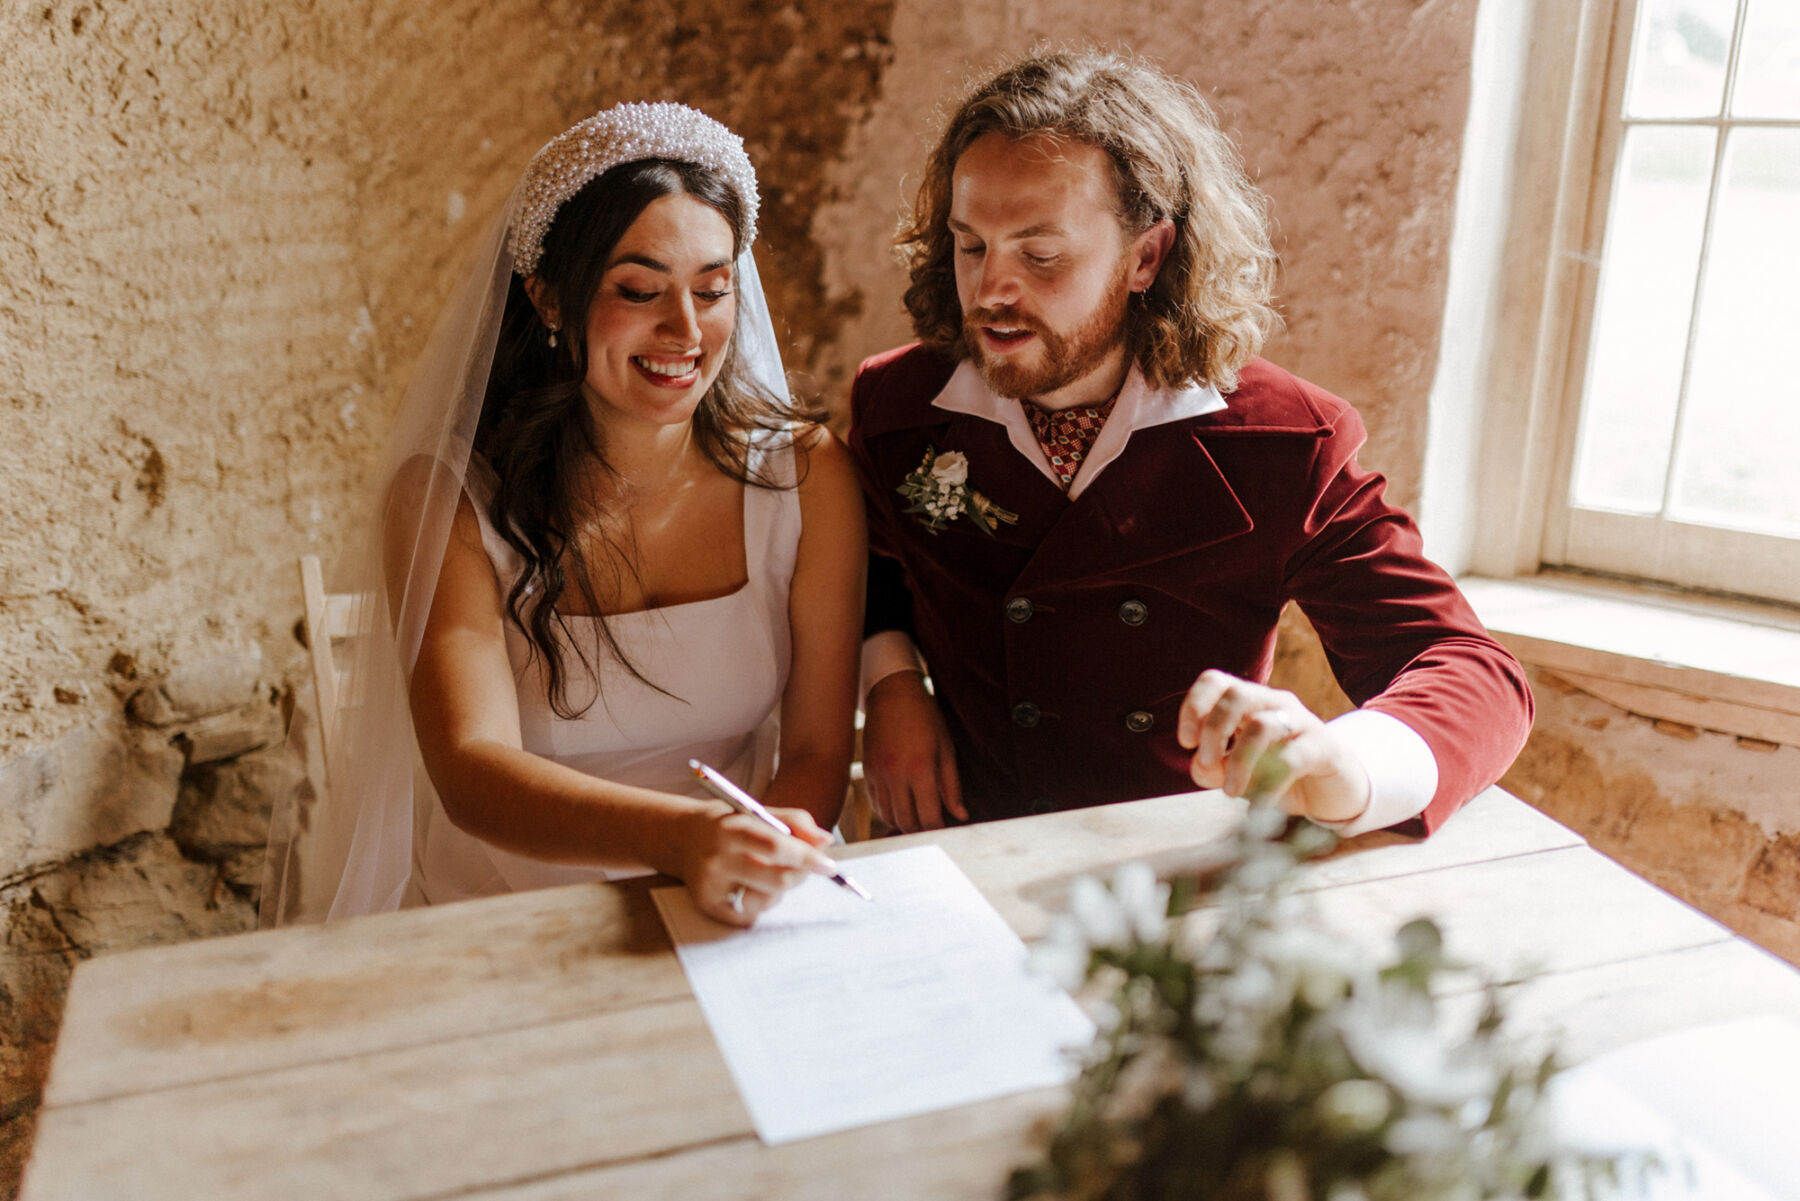 Cool bride and groom seated smiling and signing the register during their wedding ceremony.